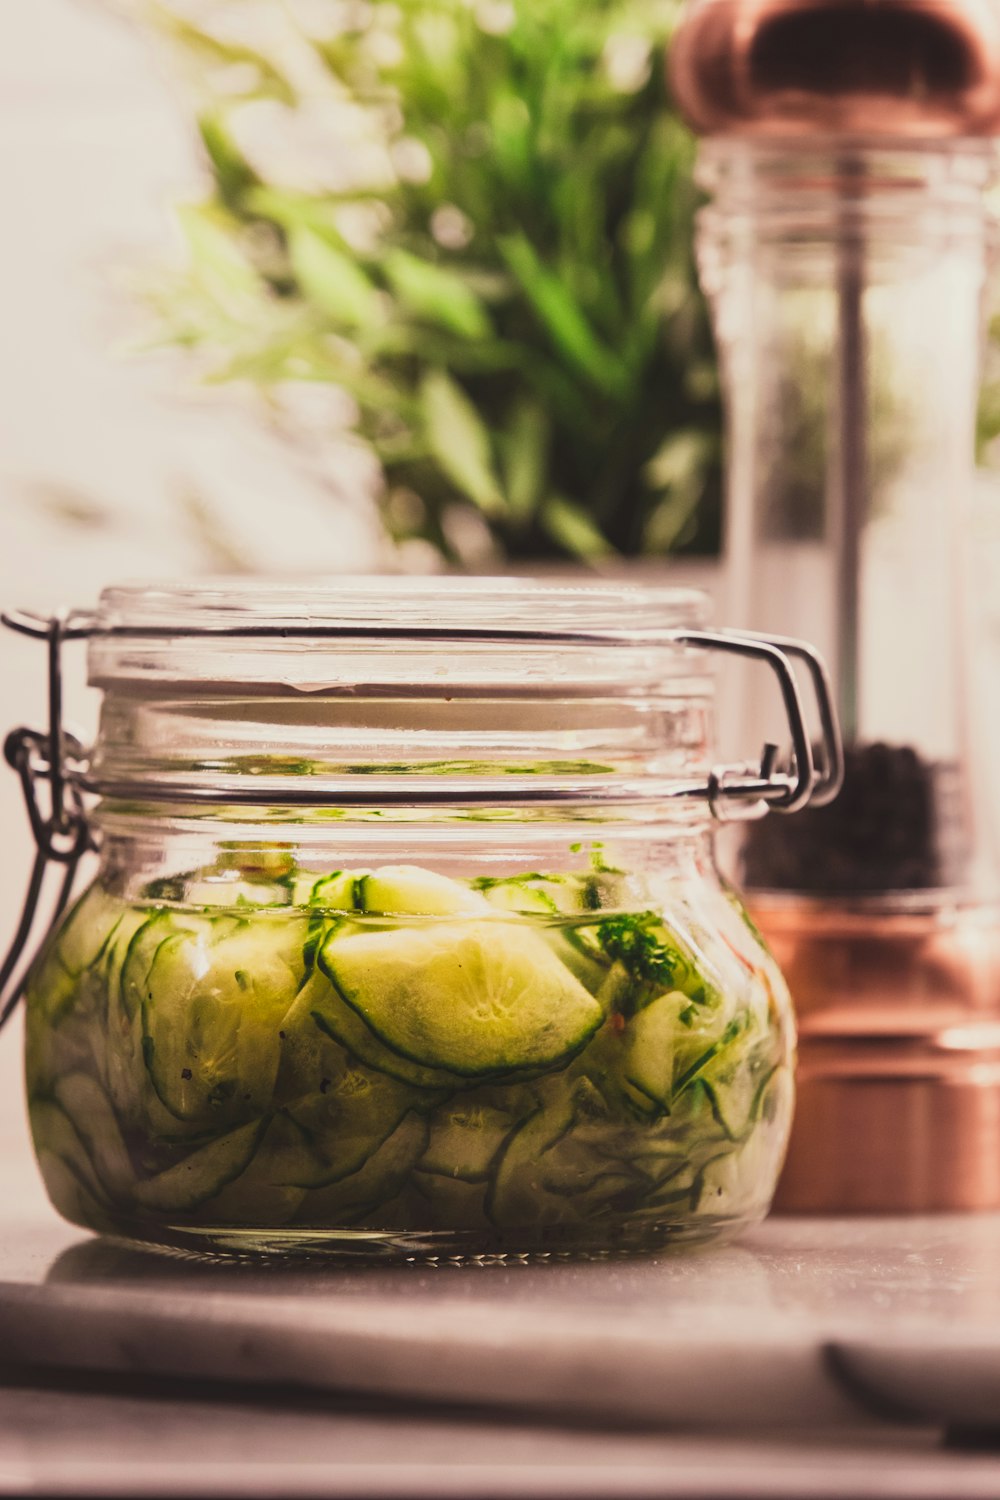 clear glass jar with green fruit inside